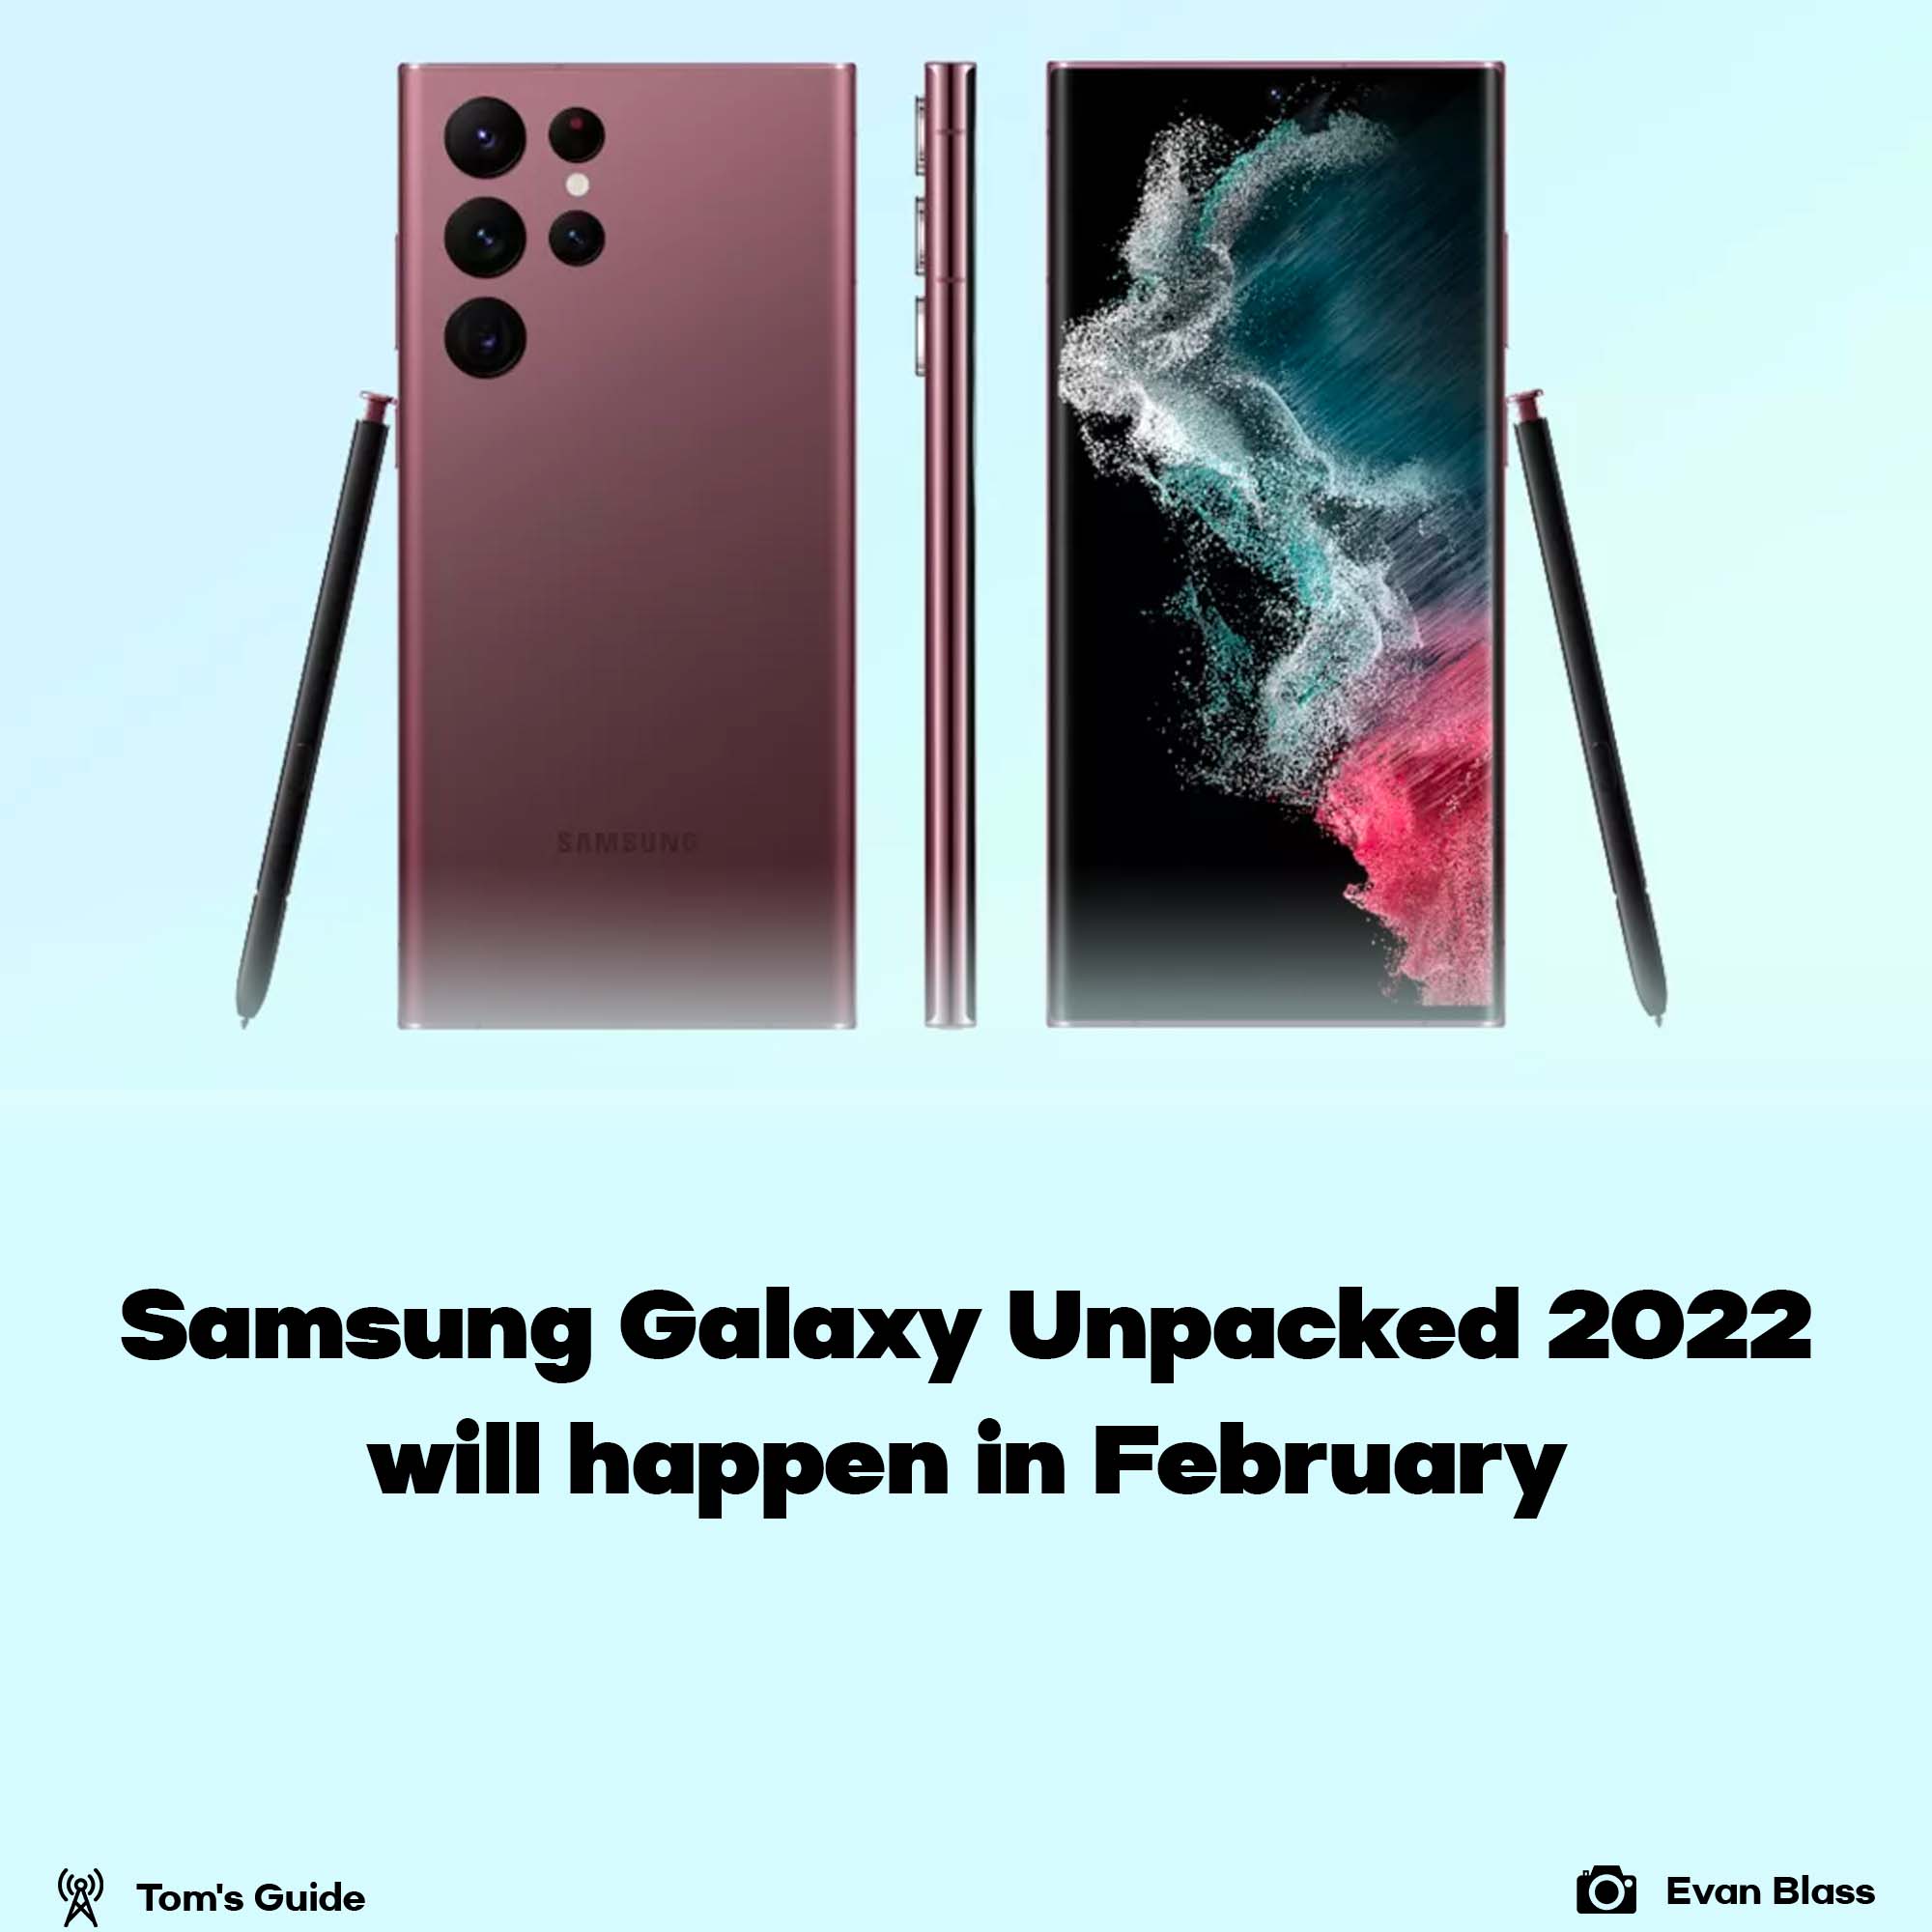 Samsung Unpacked 2022 will be in February